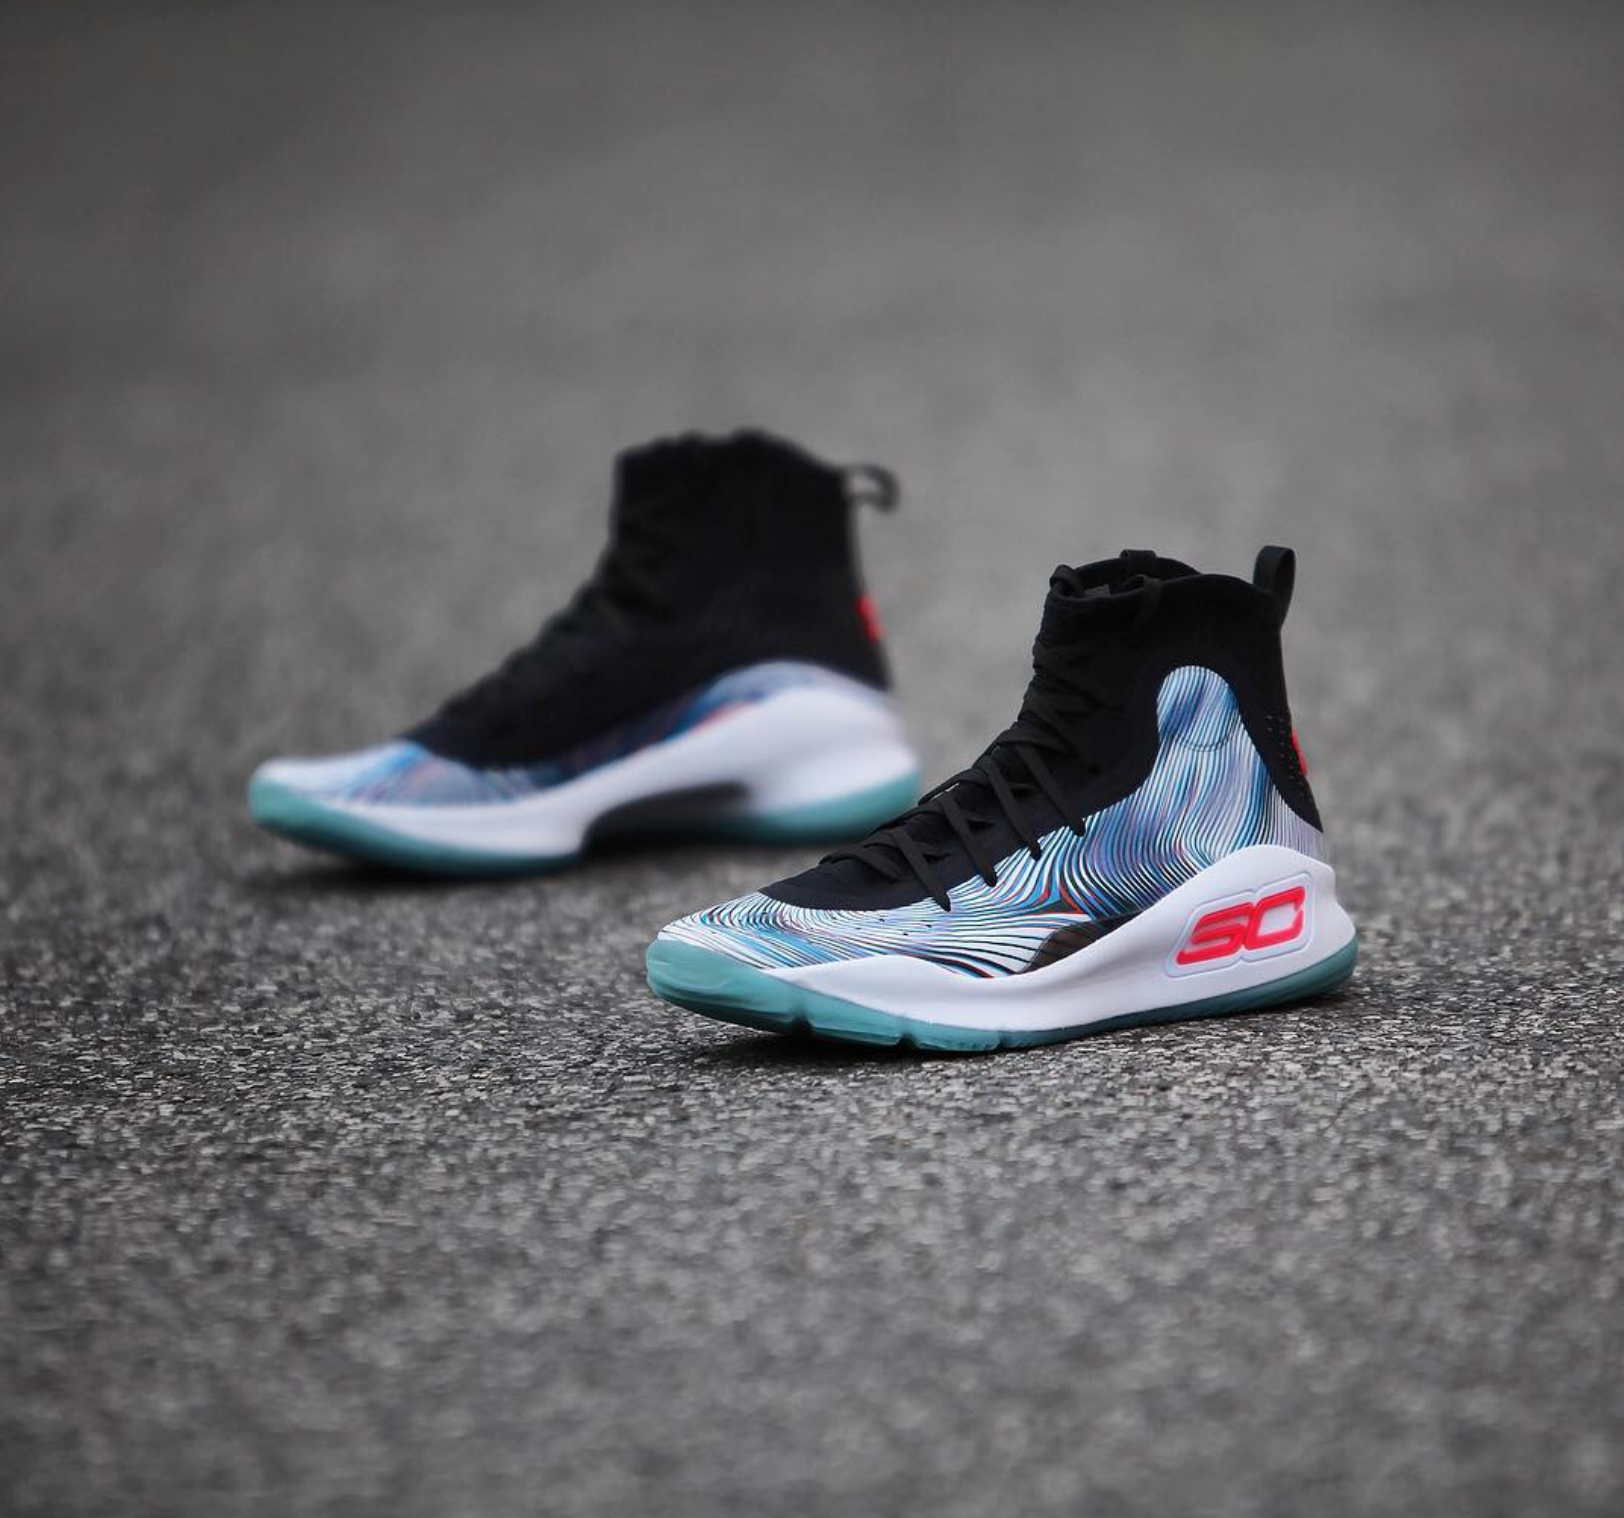 Tênis Under Armour curry 4More Magic' 1298306 016